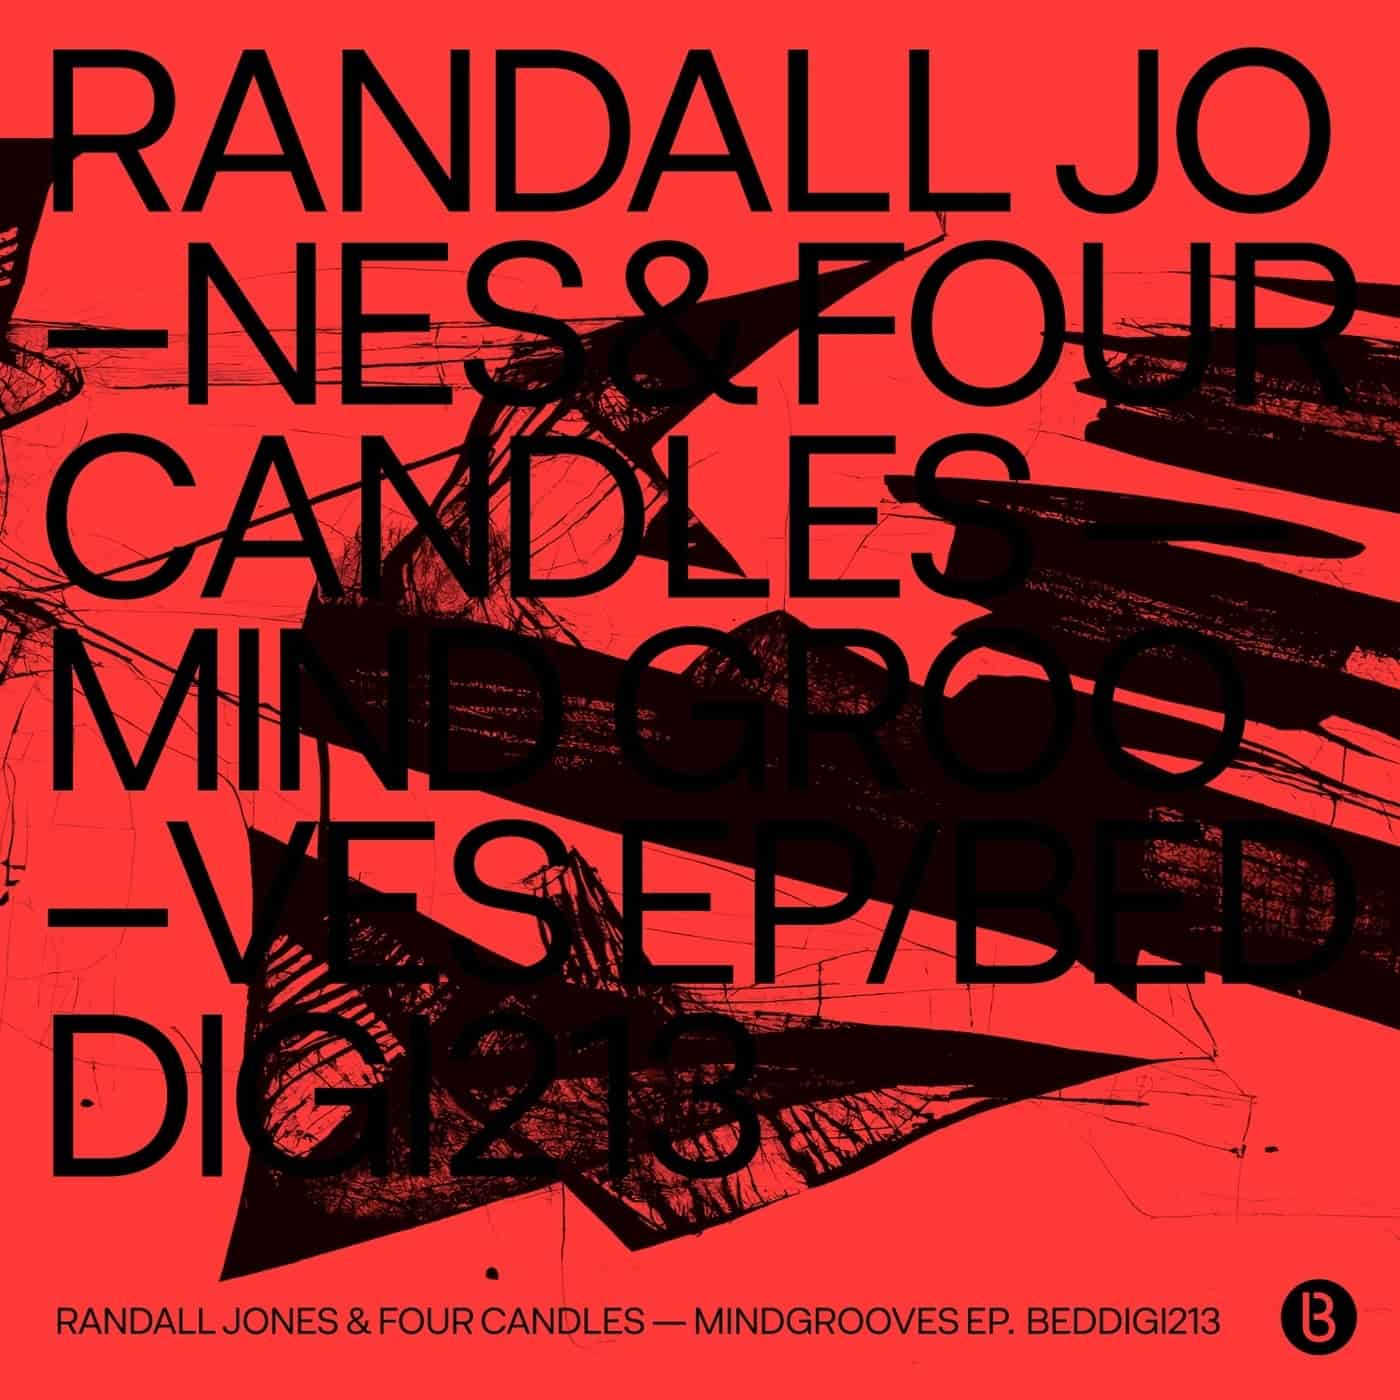 Download Randall Jones, Four Candles - Mindgrooves EP on Electrobuzz